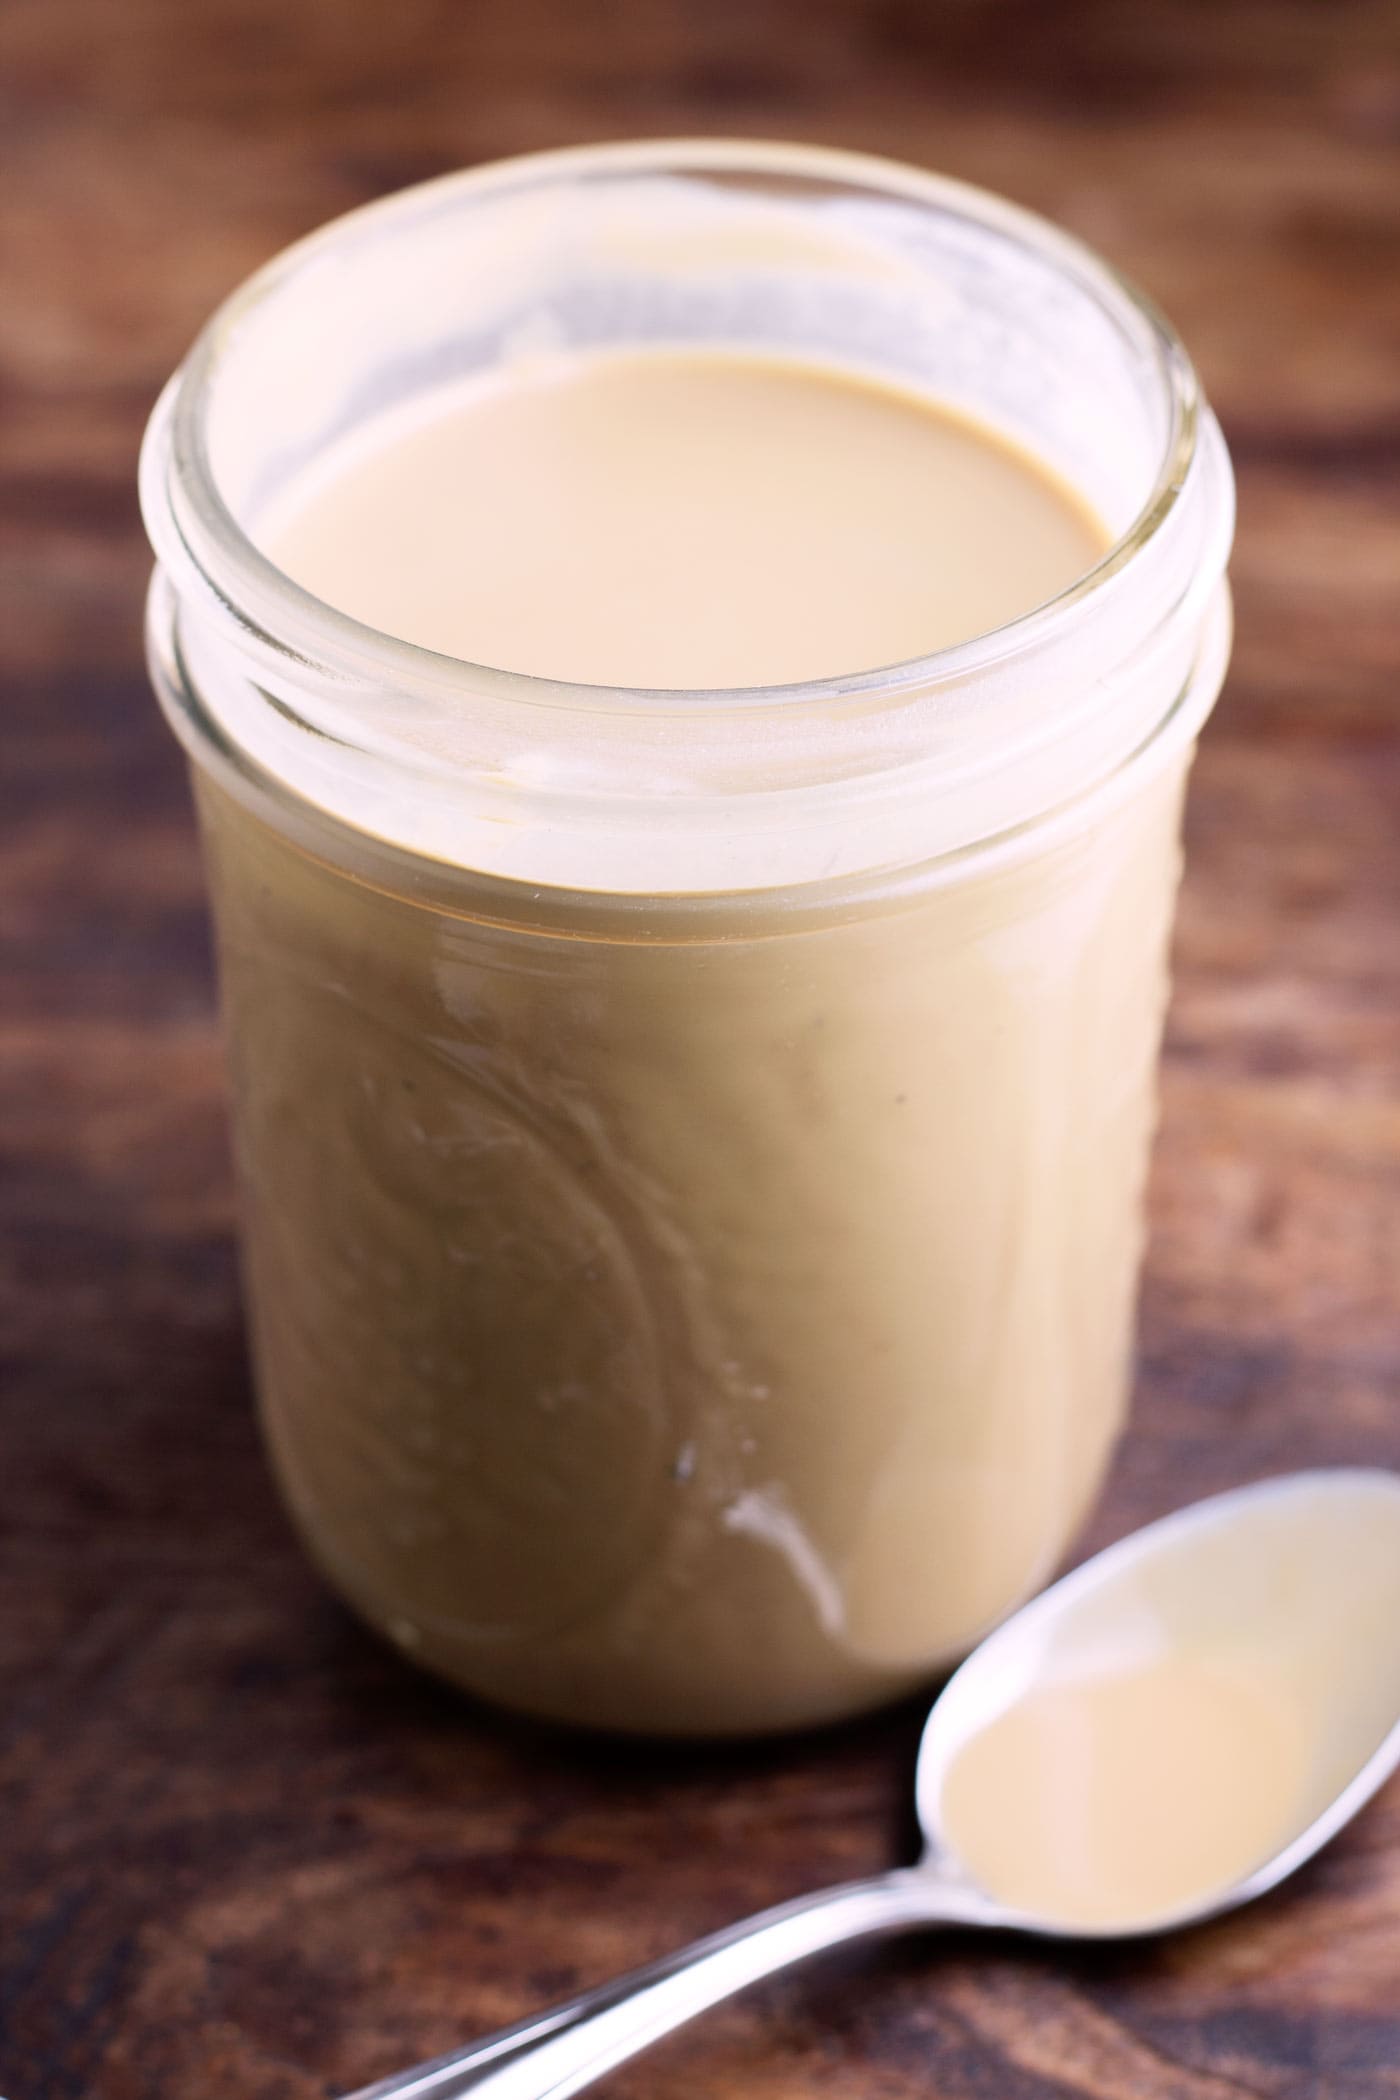 A healthy alternative to store-bought sweetened condensed milk! Easy to make at home, paleo, dairy free, vegan, and can be made keto and low carb!